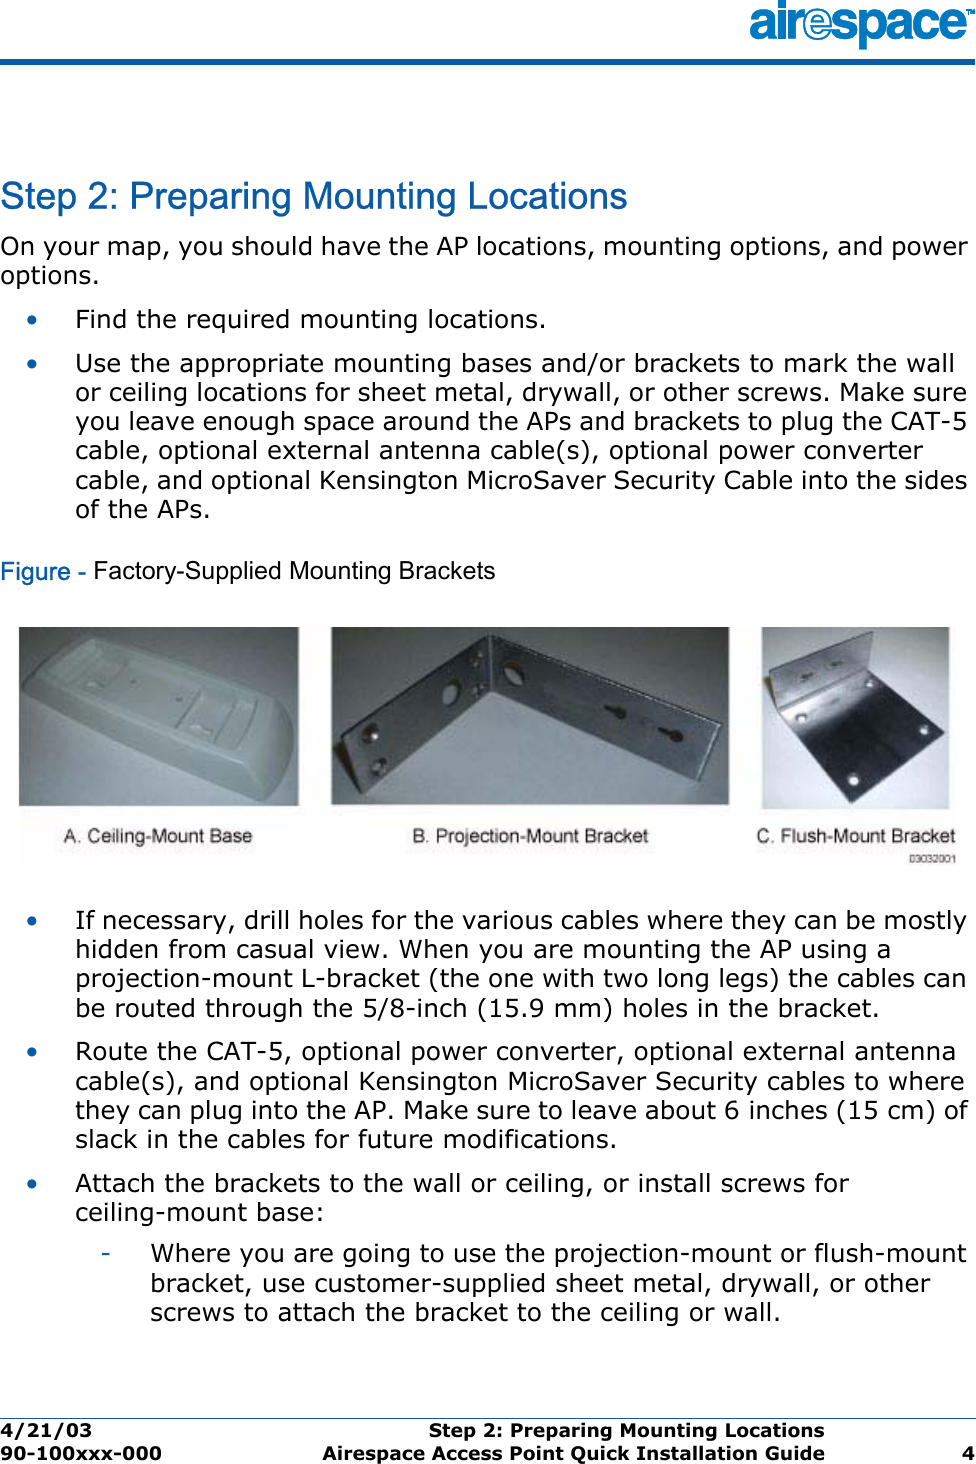 4/21/03 Step 2: Preparing Mounting Locations  90-100xxx-000 Airespace Access Point Quick Installation Guide 4Step 2: Preparing Mounting LocationsStep 2: Preparing Mounting LocationsOn your map, you should have the AP locations, mounting options, and power options.•Find the required mounting locations.•Use the appropriate mounting bases and/or brackets to mark the wall or ceiling locations for sheet metal, drywall, or other screws. Make sure you leave enough space around the APs and brackets to plug the CAT-5 cable, optional external antenna cable(s), optional power converter cable, and optional Kensington MicroSaver Security Cable into the sides of the APs.Figure - Factory-Supplied Mounting Brackets•If necessary, drill holes for the various cables where they can be mostly hidden from casual view. When you are mounting the AP using a projection-mount L-bracket (the one with two long legs) the cables can be routed through the 5/8-inch (15.9 mm) holes in the bracket.•Route the CAT-5, optional power converter, optional external antenna cable(s), and optional Kensington MicroSaver Security cables to where they can plug into the AP. Make sure to leave about 6 inches (15 cm) of slack in the cables for future modifications.•Attach the brackets to the wall or ceiling, or install screws for ceiling-mount base:-Where you are going to use the projection-mount or flush-mount bracket, use customer-supplied sheet metal, drywall, or other screws to attach the bracket to the ceiling or wall.